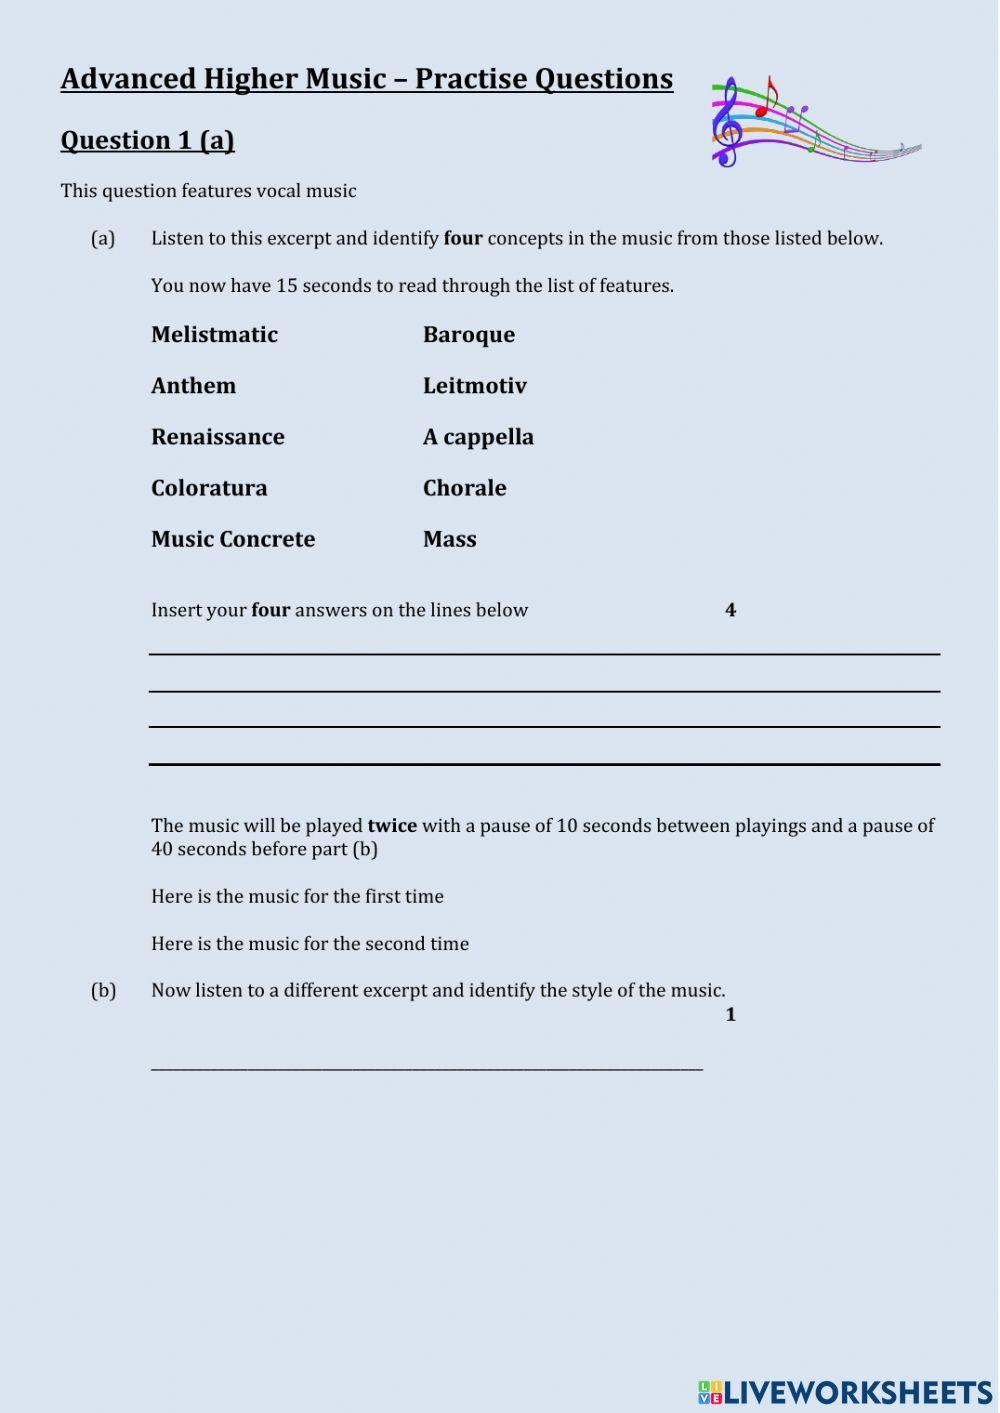 AH Music - Practise Question 1a